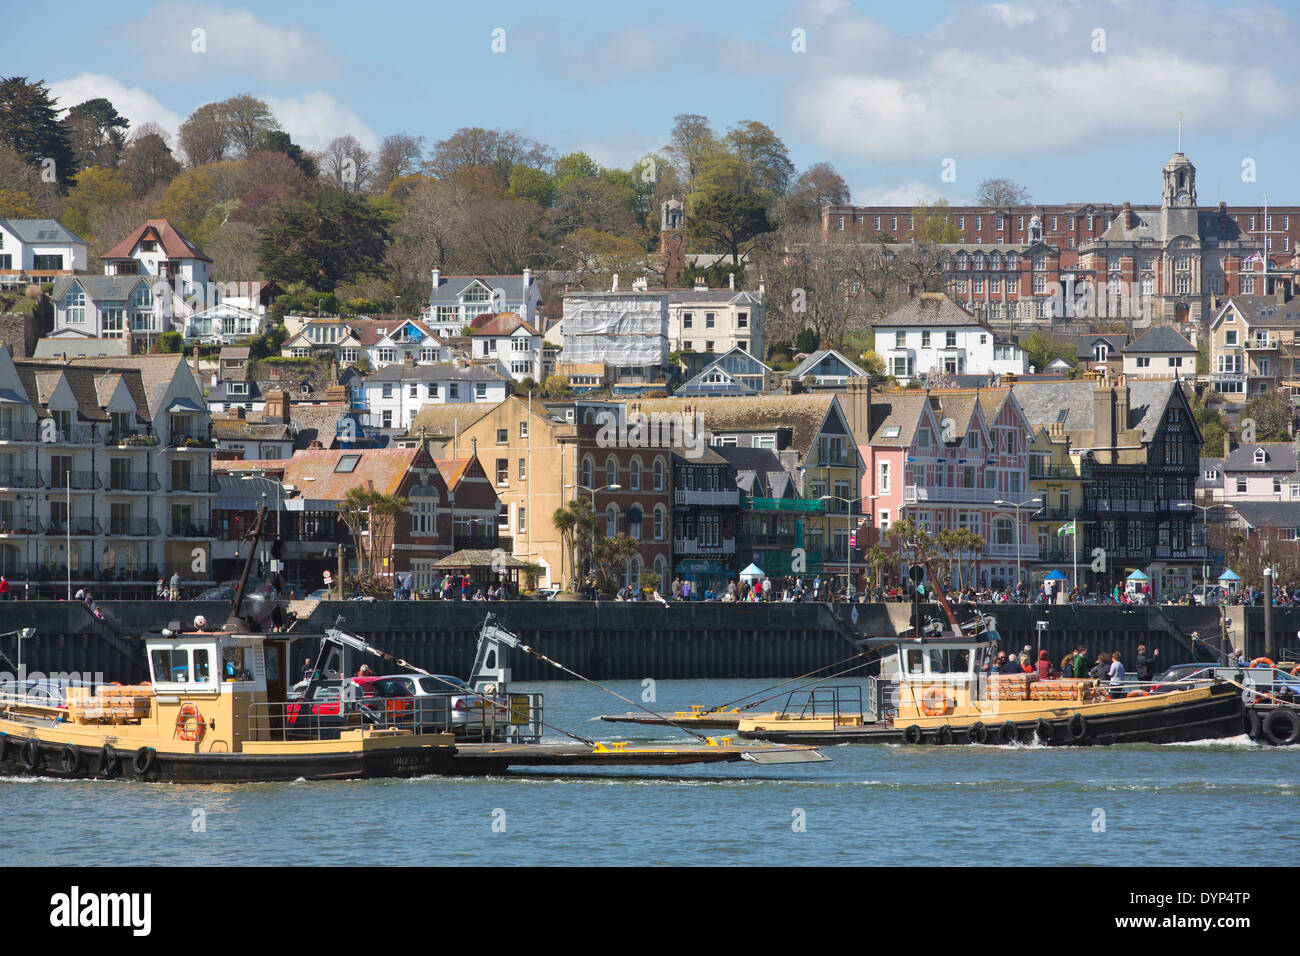 Car ferries crossing picturesque Dartmouth Harbour, Dart Harbour flows through the town Dartmouth, South Devon, England, UK Stock Photo